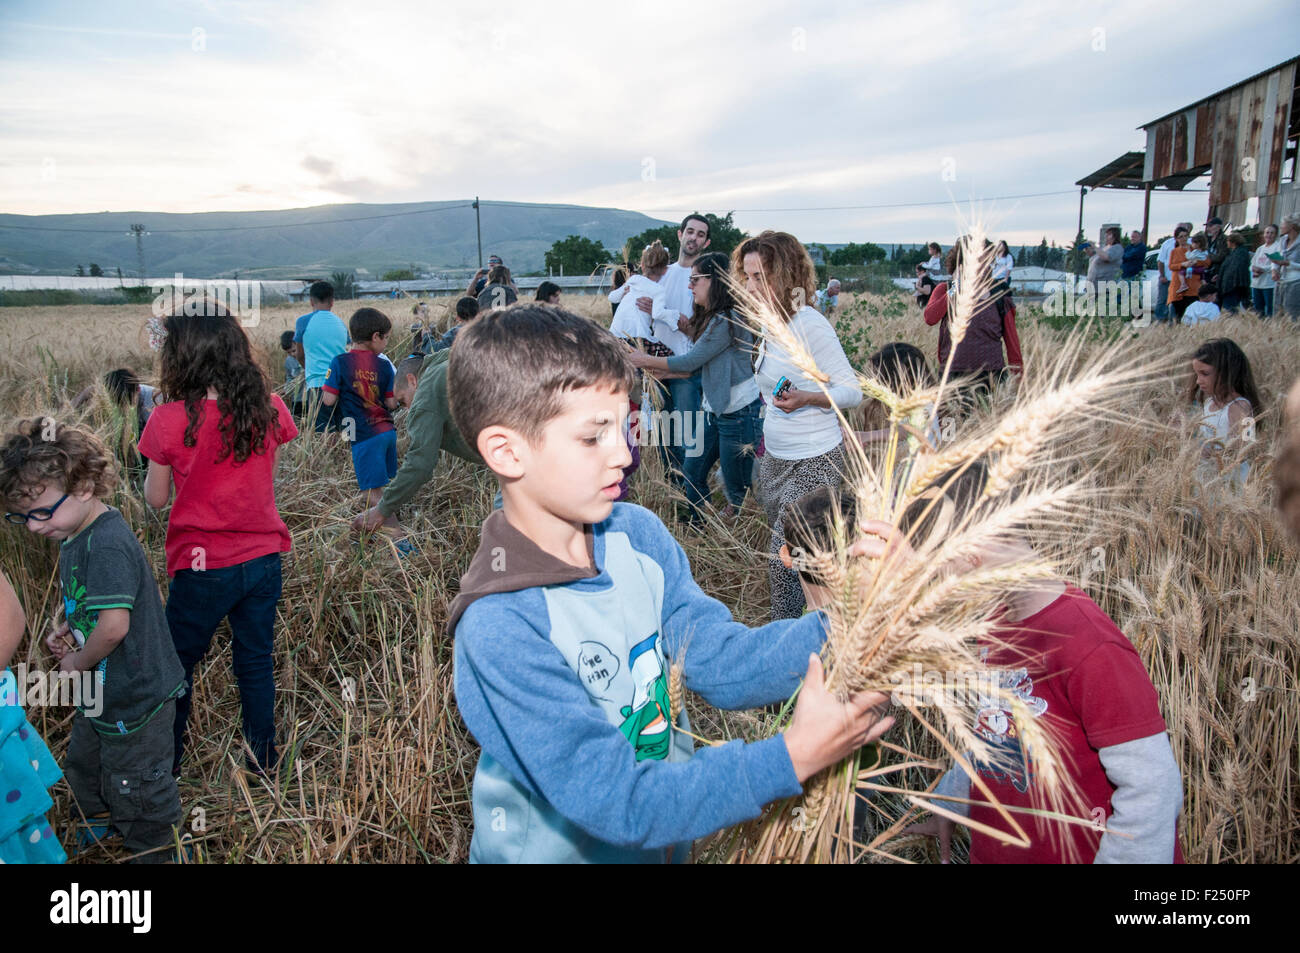 Children and families harvest a wheat field celebrating spring harvest. Photographed at Kibbutz Ashdot Yaacov, Israel Stock Photo